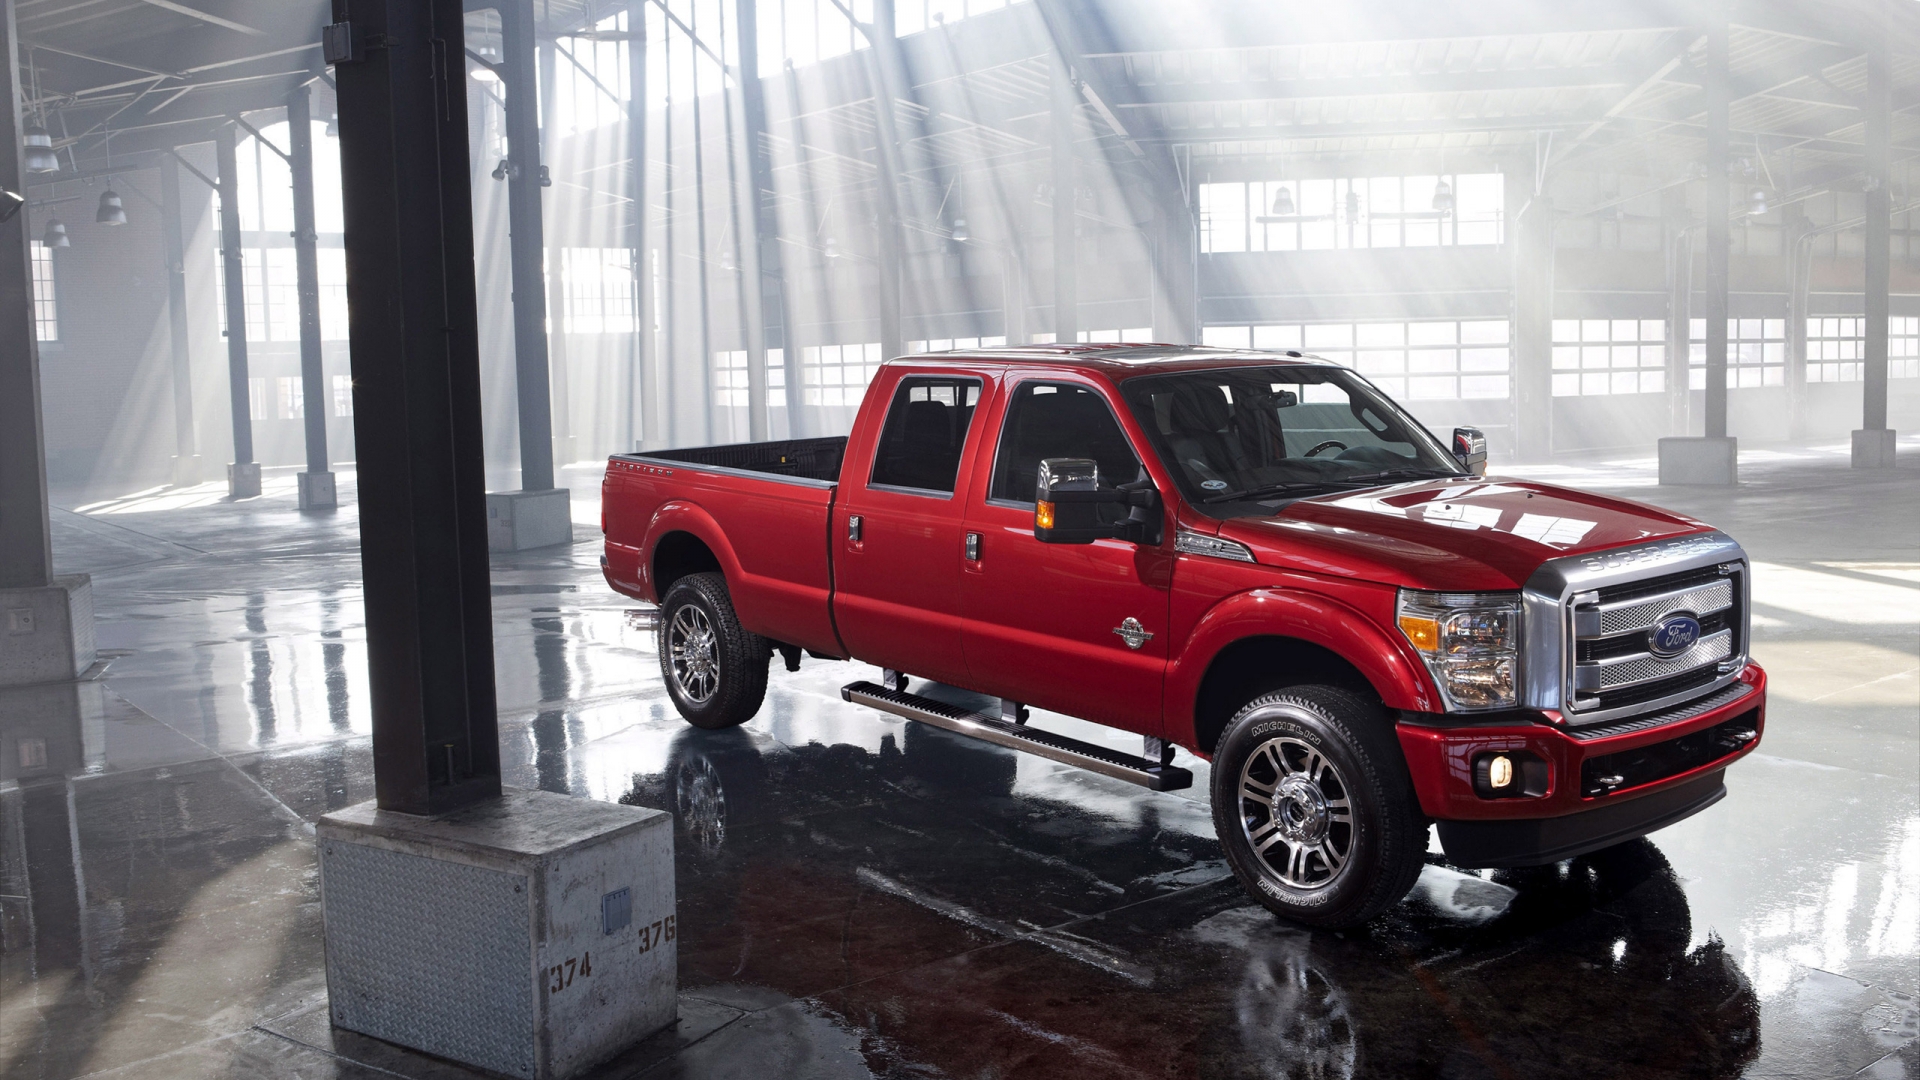 2013 Ford Super Duty Platinum Red for 1920 x 1080 HDTV 1080p resolution